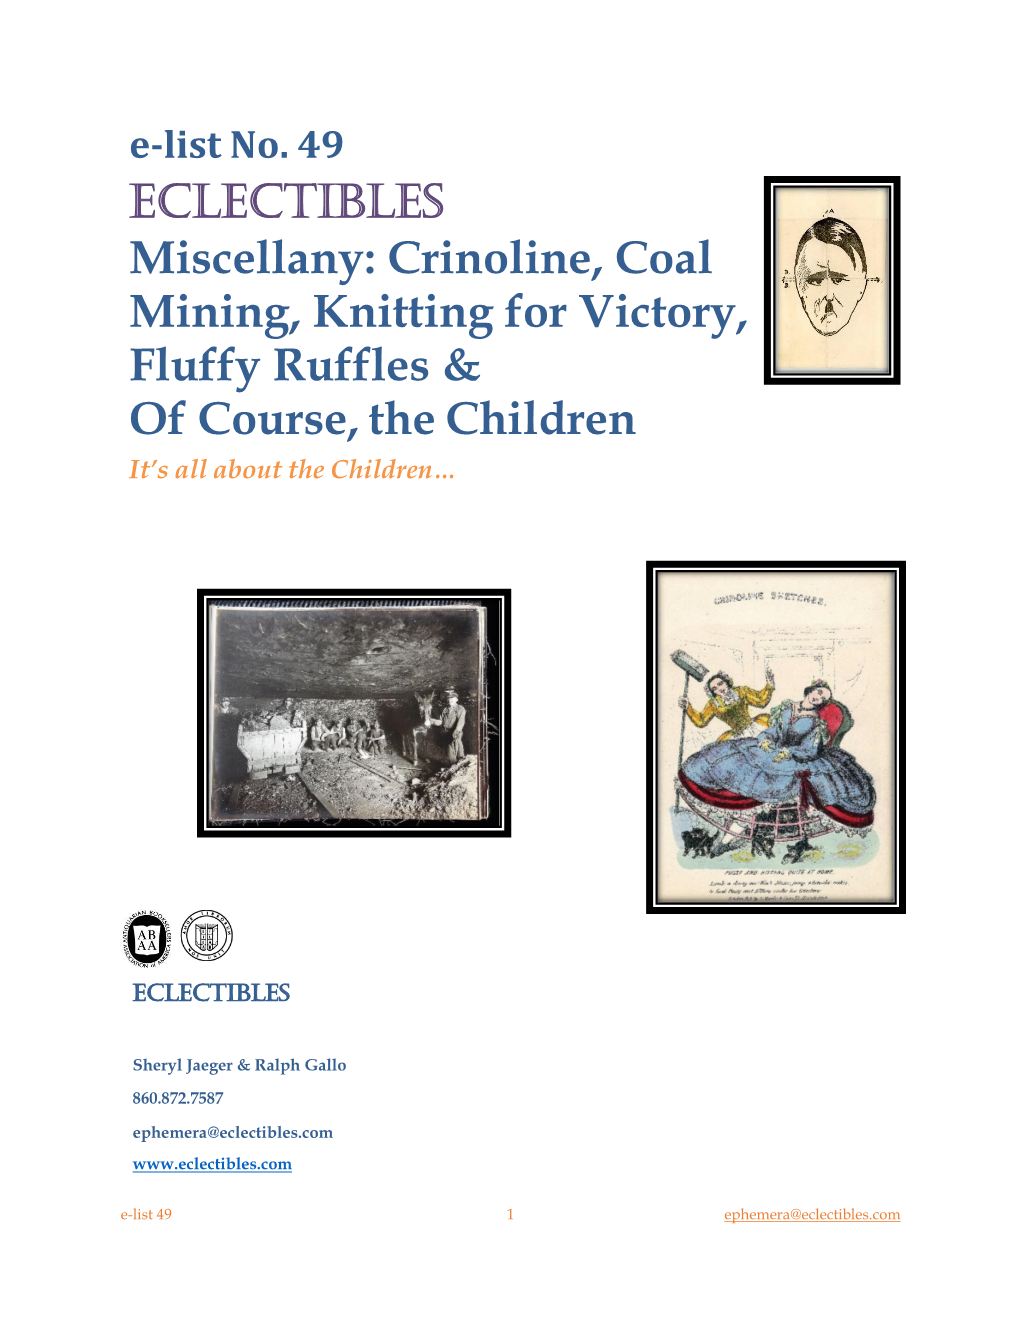 Eclectibles Miscellany: Crinoline, Coal Mining, Knitting for Victory, Fluffy Ruffles & of Course, the Children